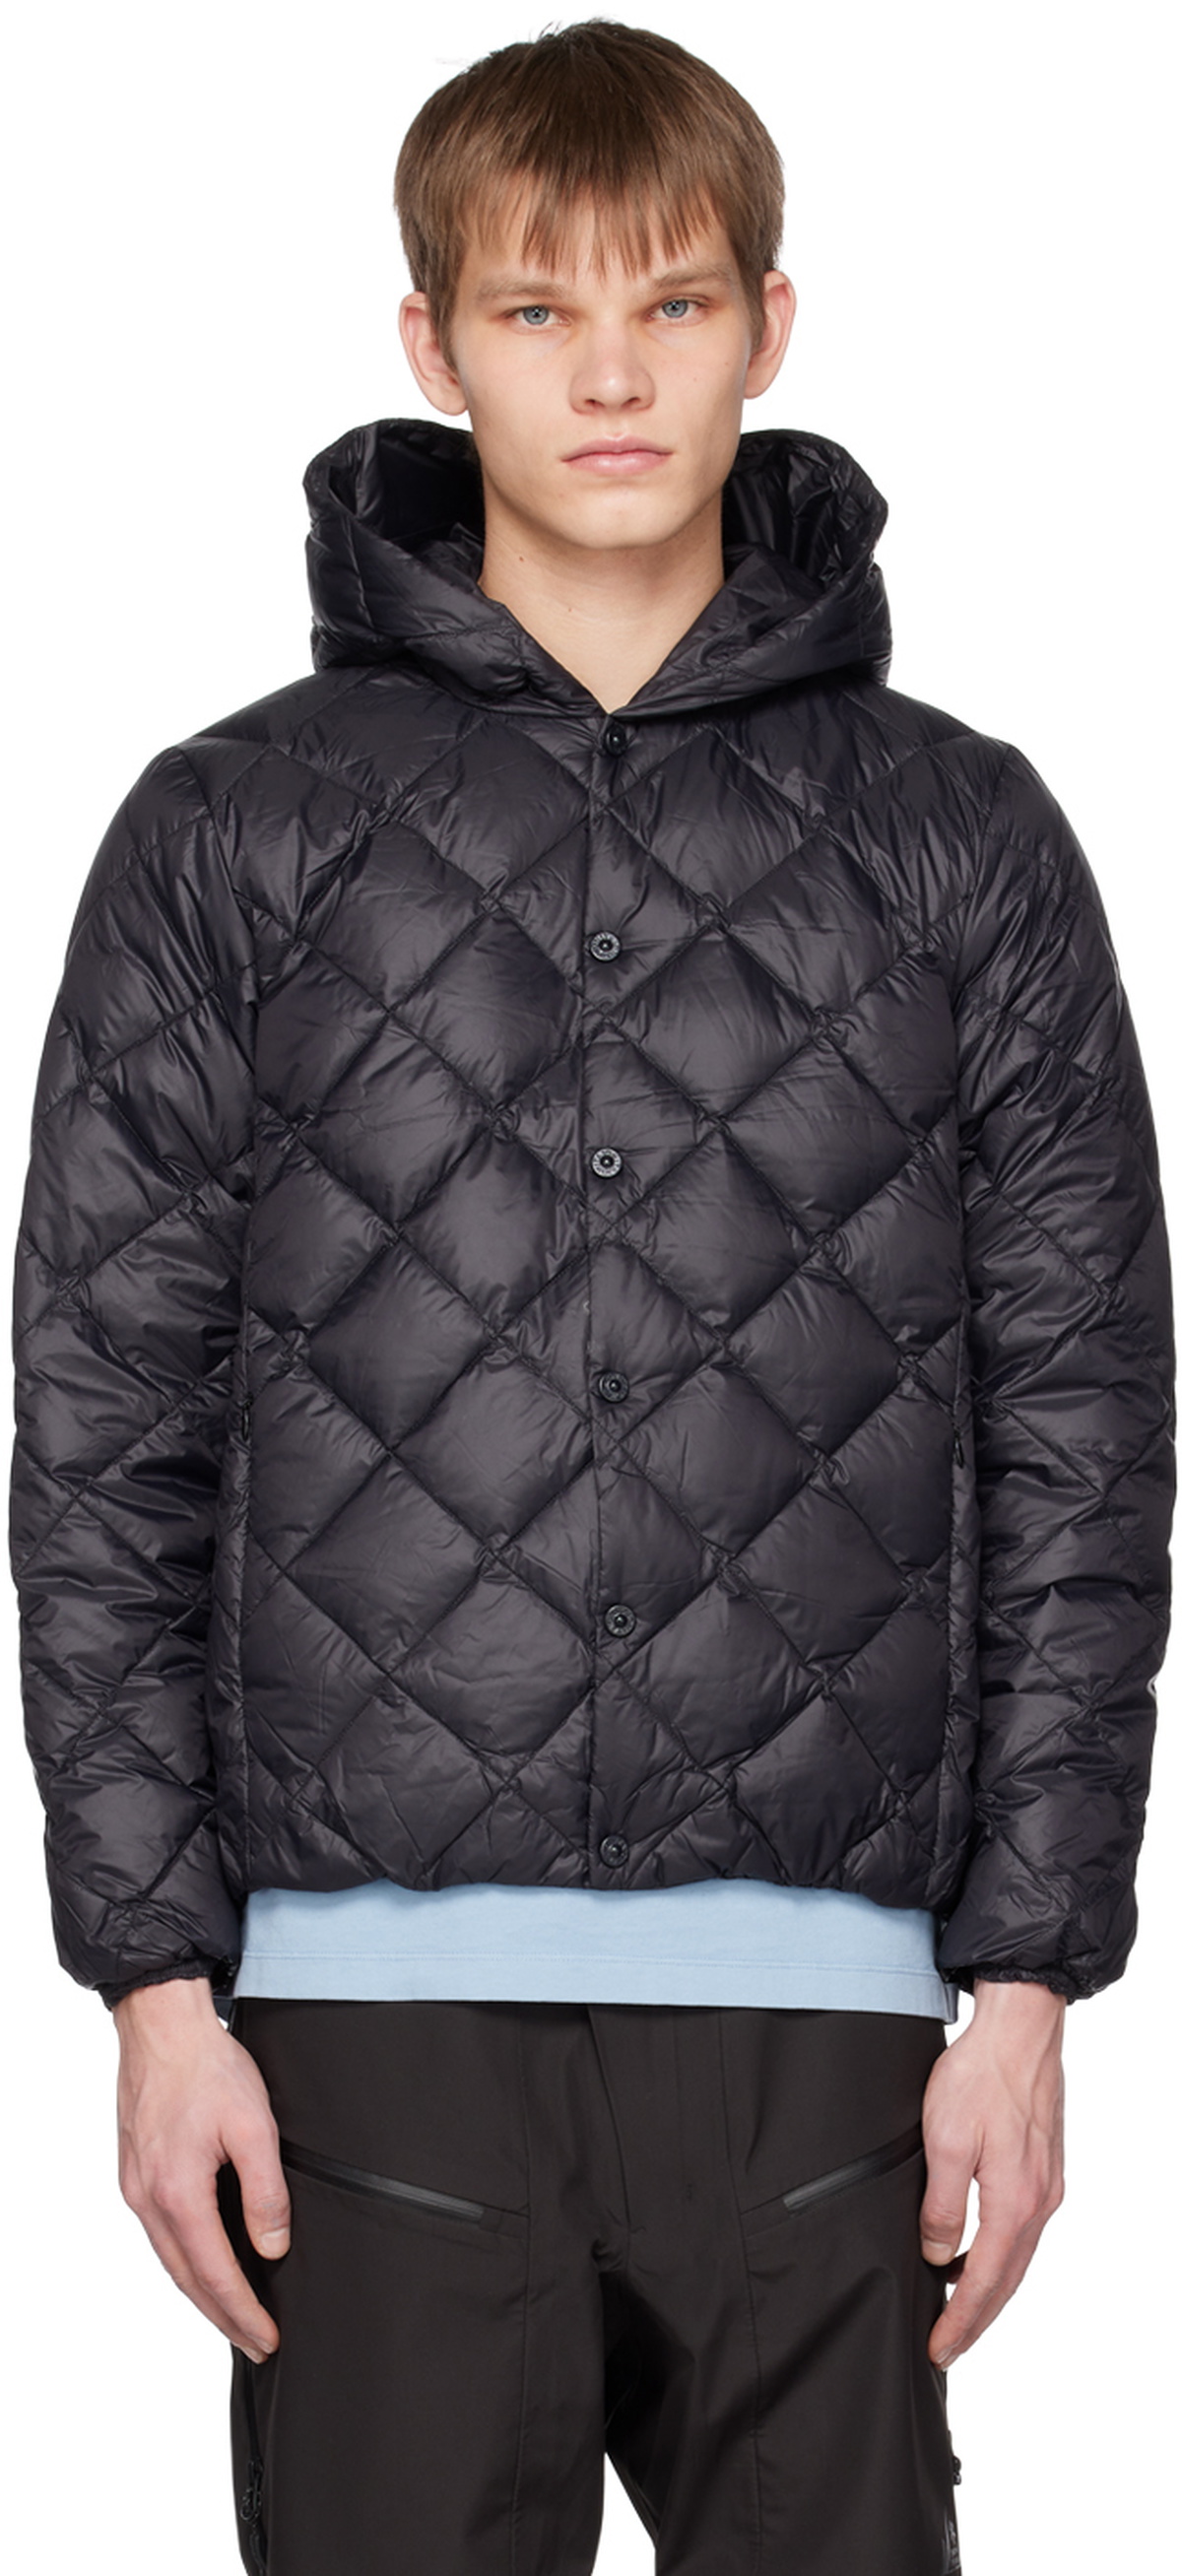 TAION Black Hooded Down Jacket Taion Extra